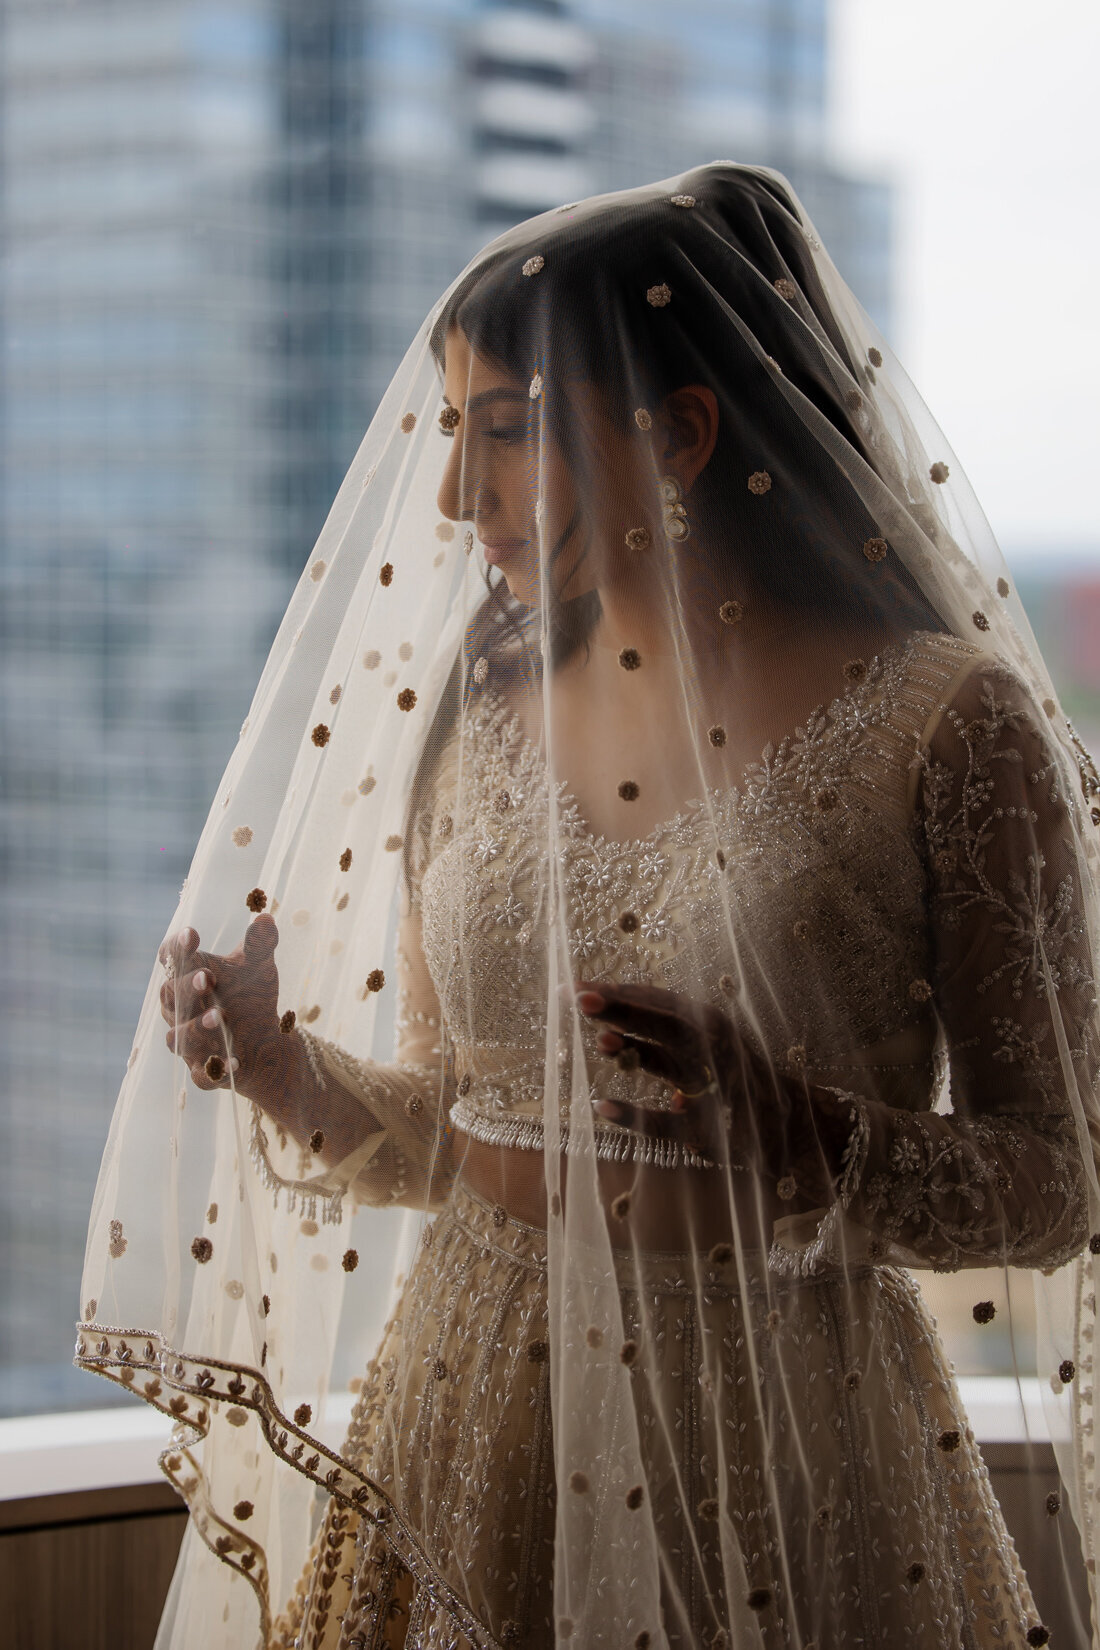 Bride in wedding gown and veil looking out the window.